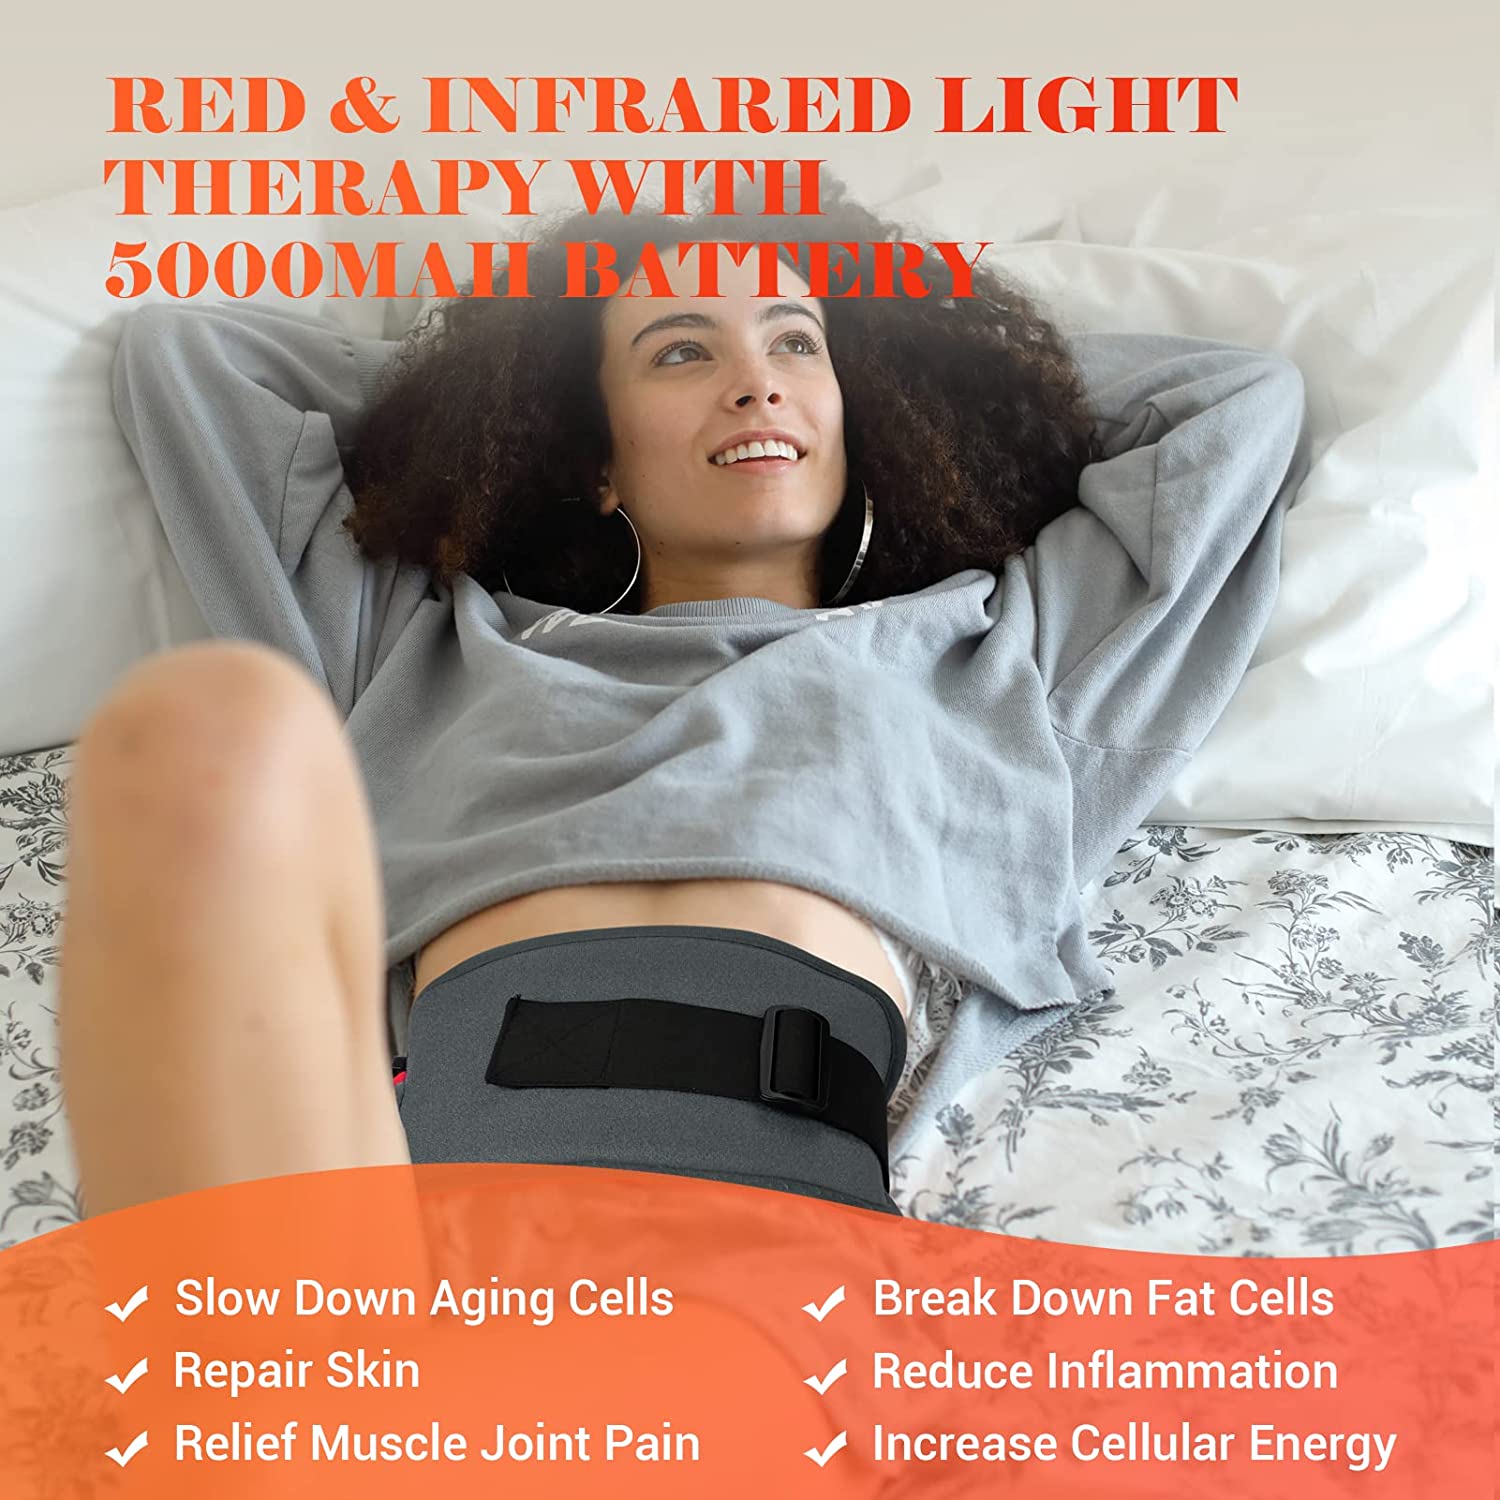  KTS Sciatica Pain Relief Devices, Relief Lower Back Pain, Red  Light Therapy for Herniated Disc and Scoliosis, Breathable and Lightweight  : Health & Household